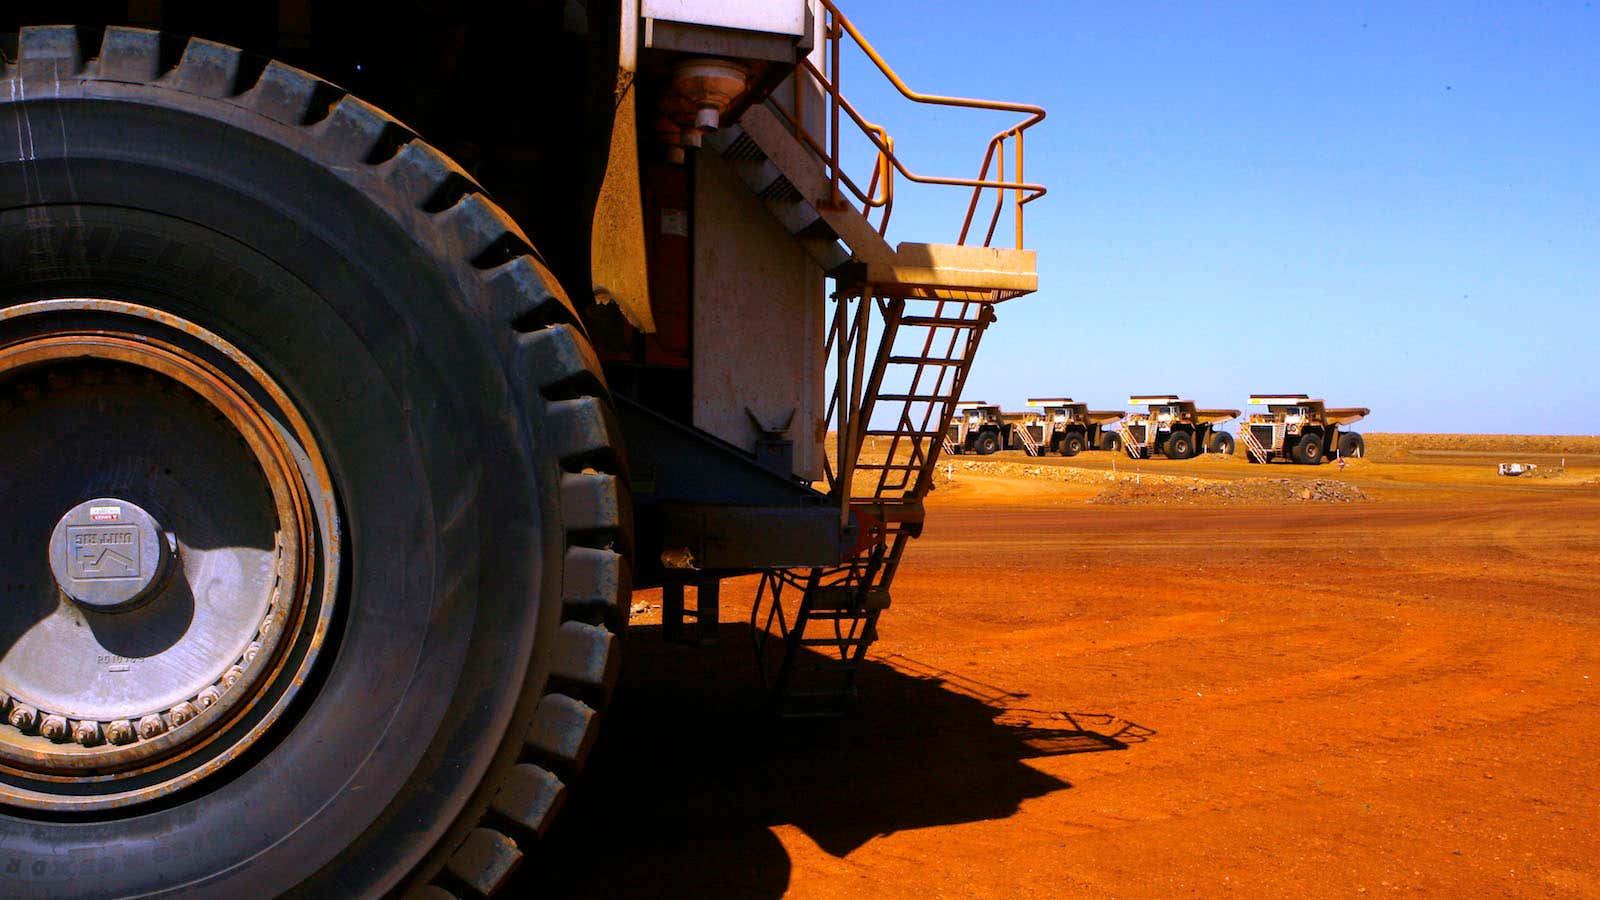 In this photo taken on March 4, 2010, large dump trucks are lined up at Rio Tinto operations at Dampier in Western Australia. Mining giant…